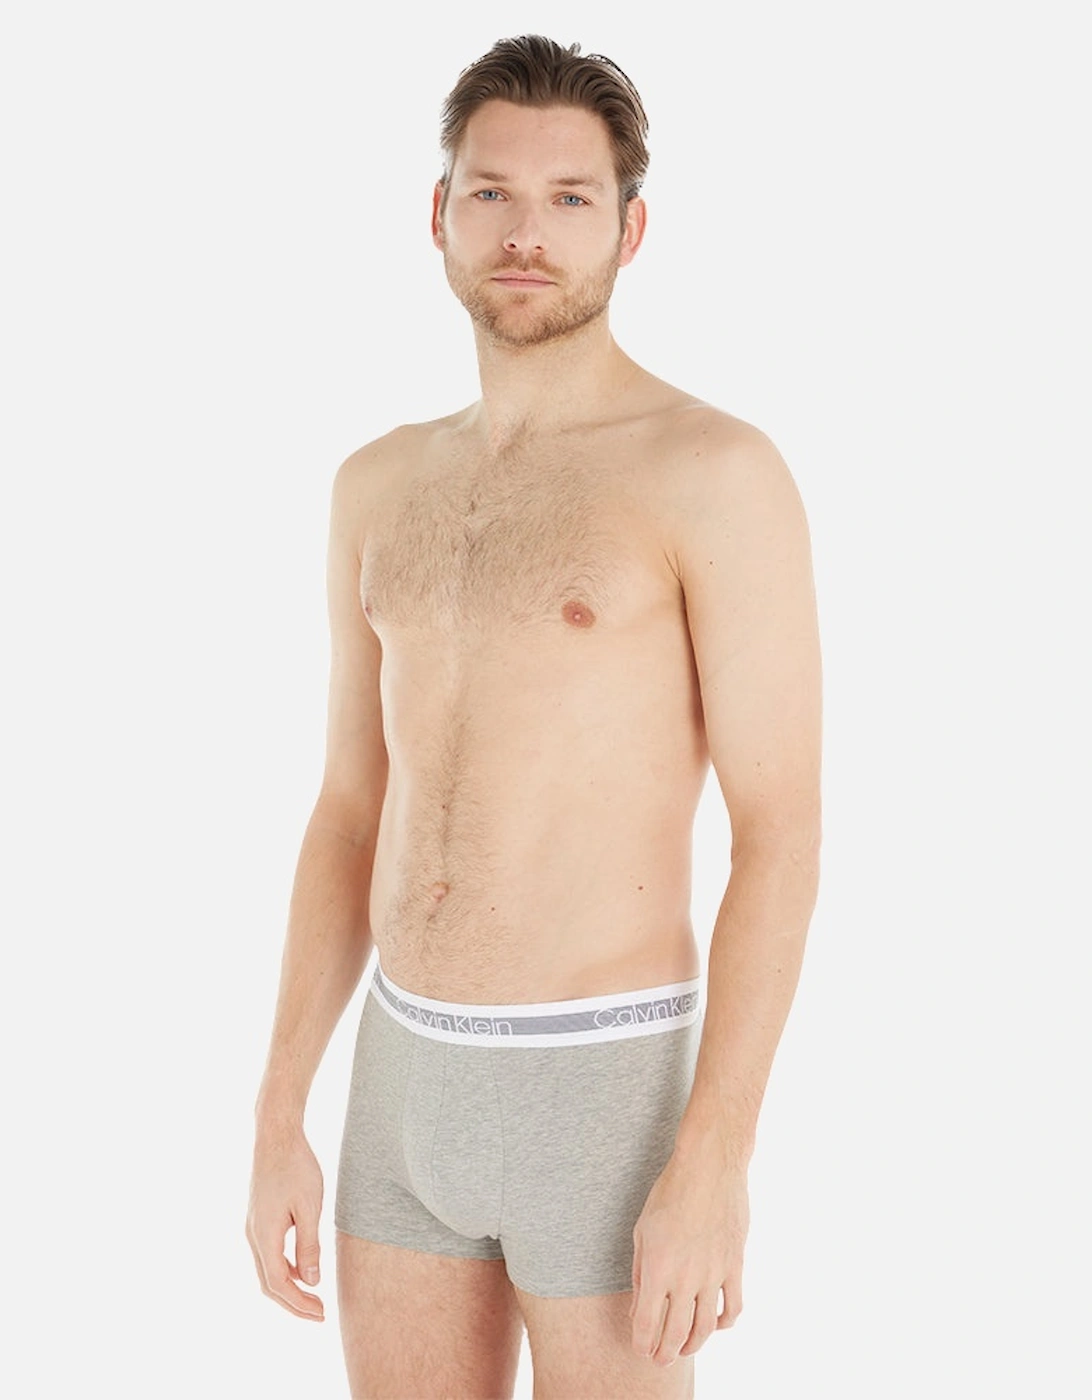 3-Pack Cooling Cotton Stretch Boxer Trunks, Black/White/Grey